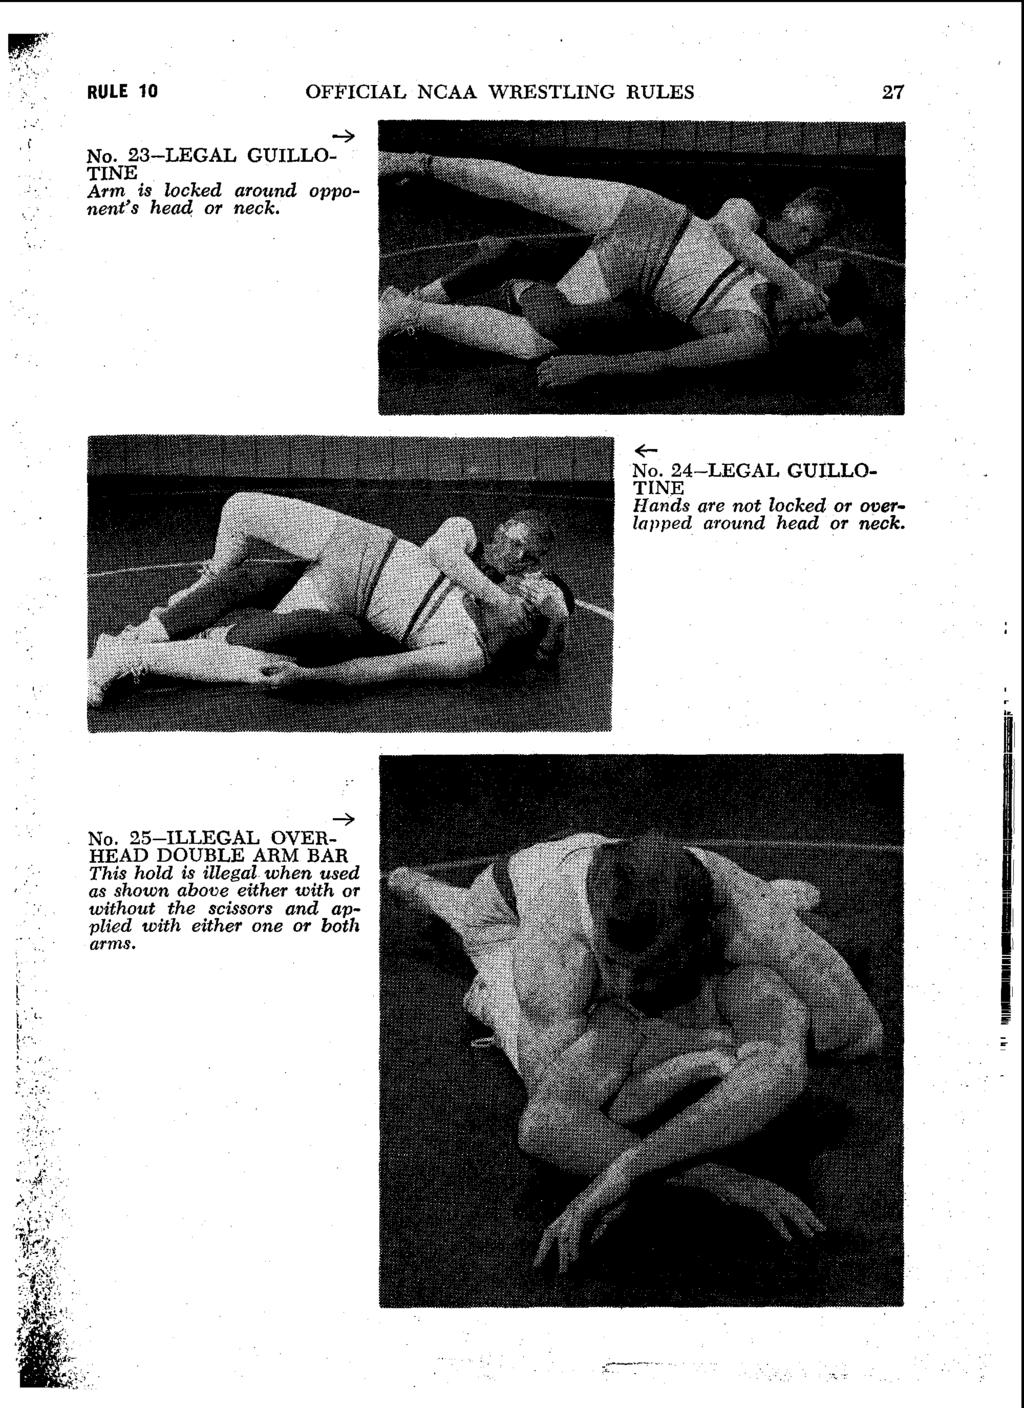 RULE 10 OFFICIAL NCAA WRESTLING RULES 27 + NO.